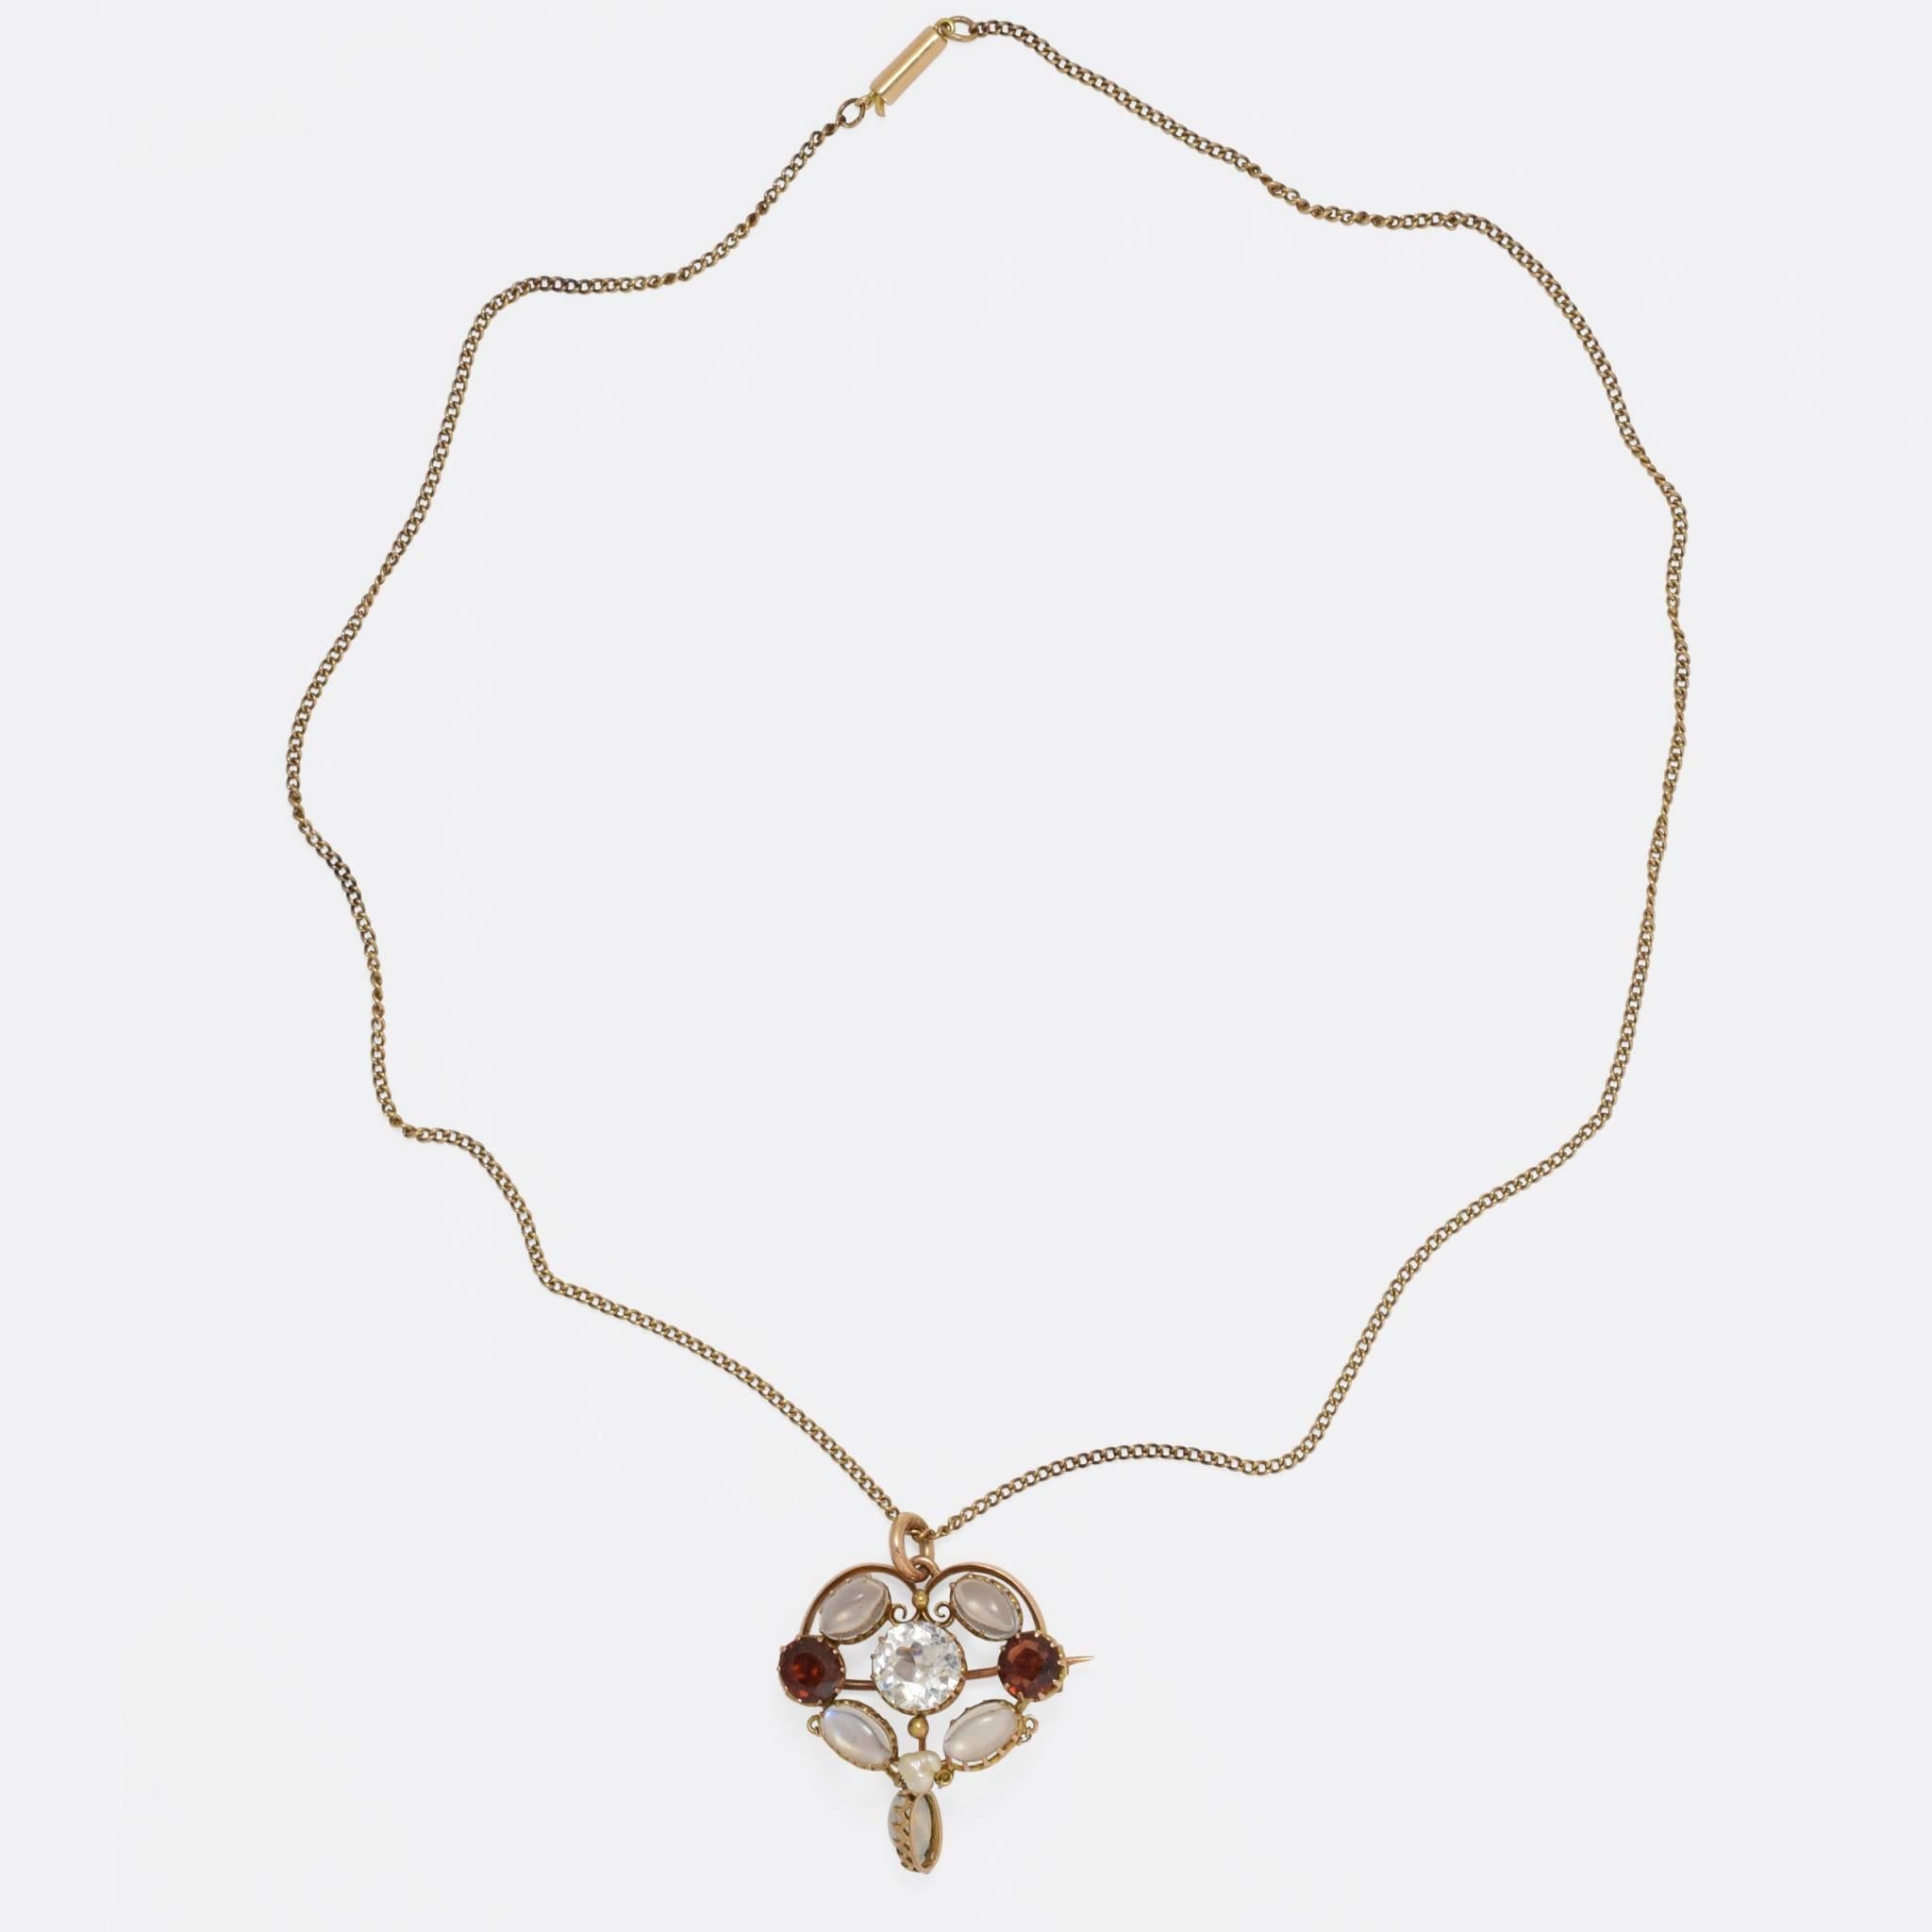 This superb necklace has the shape of a stylised heart - set with a lovely combination of blue moonstone, garnet and baroque pearl, all around a beautiful pale aquamarine. It was made in the 1920s and is modelled in 9ct gold, with fittings for wear